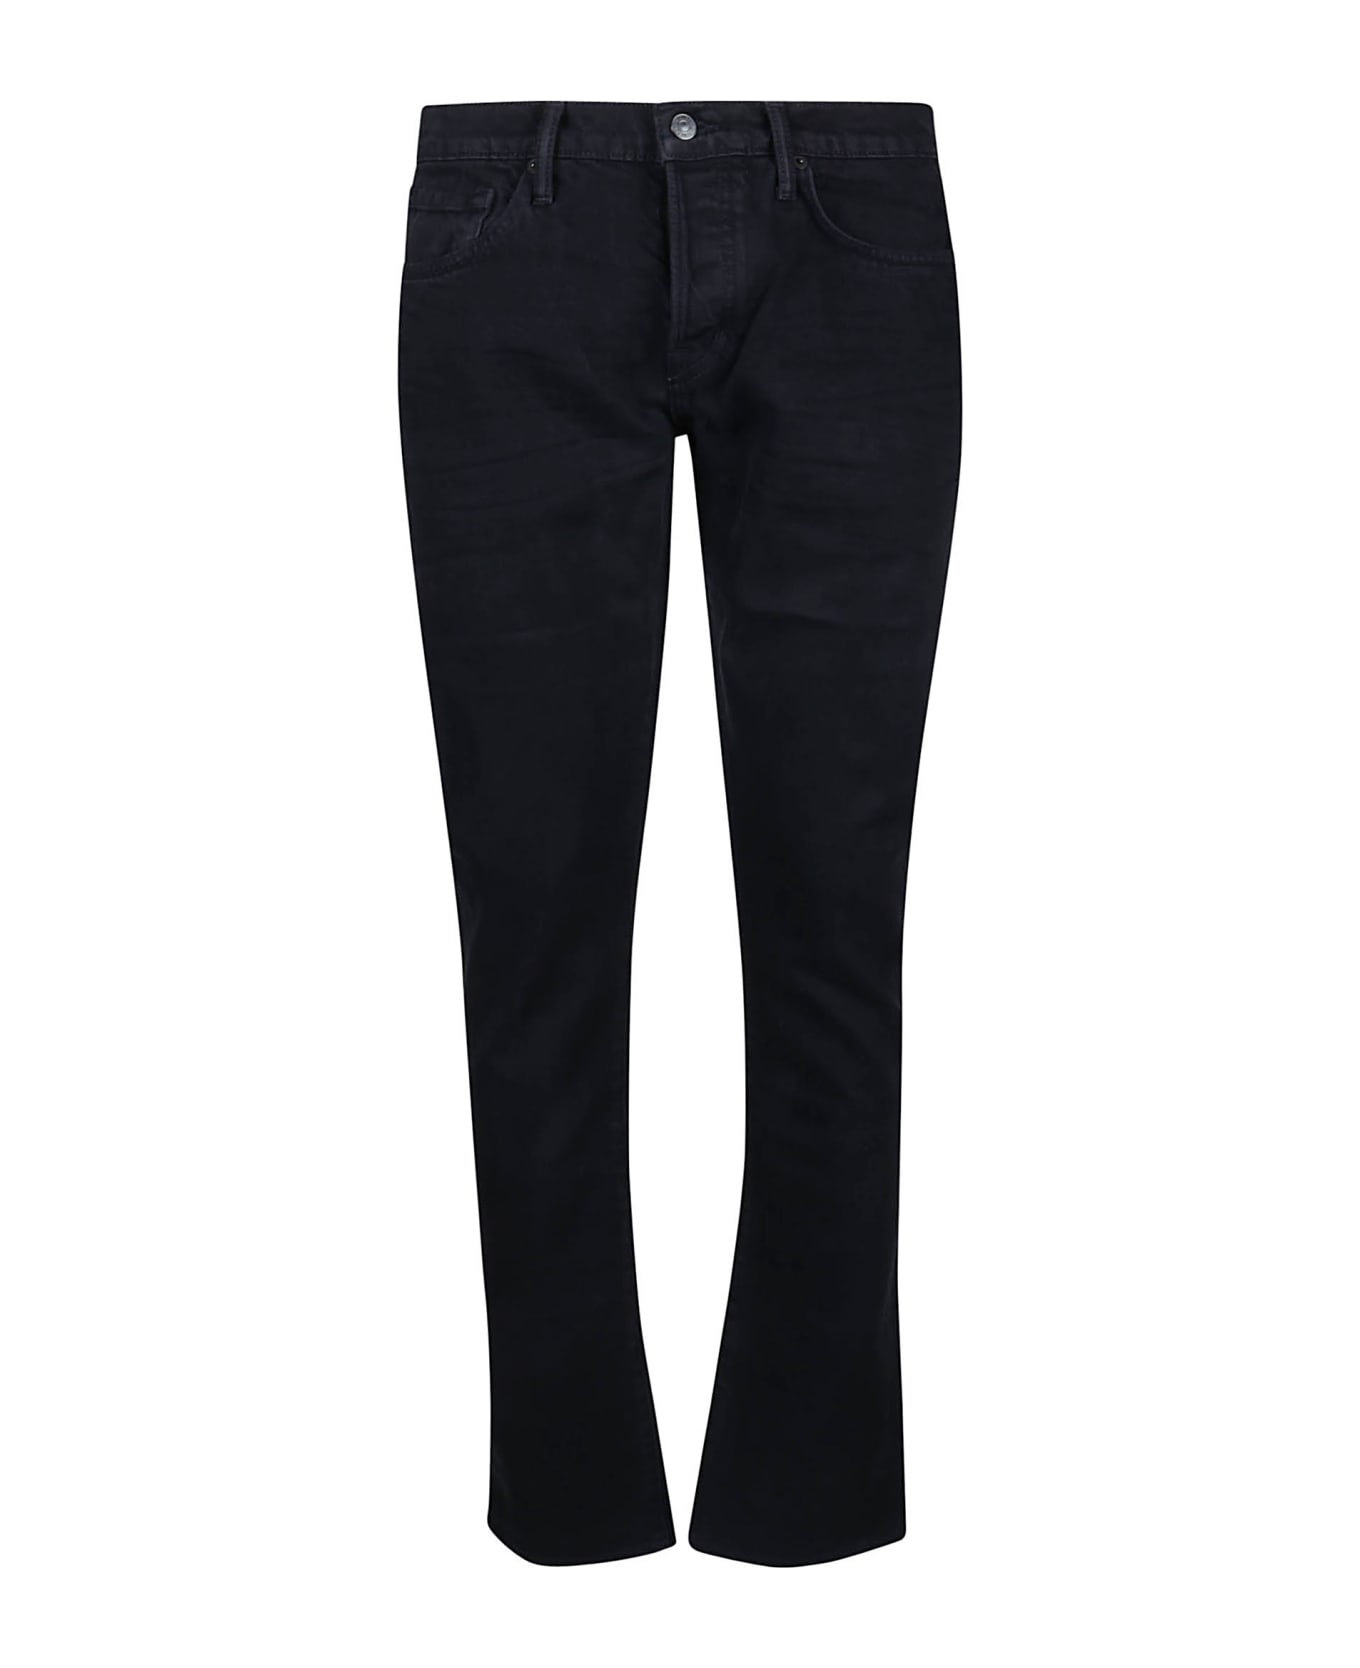 Tom Ford Light Rinse Slim Fit Jeans - Washed Indigo ボトムス